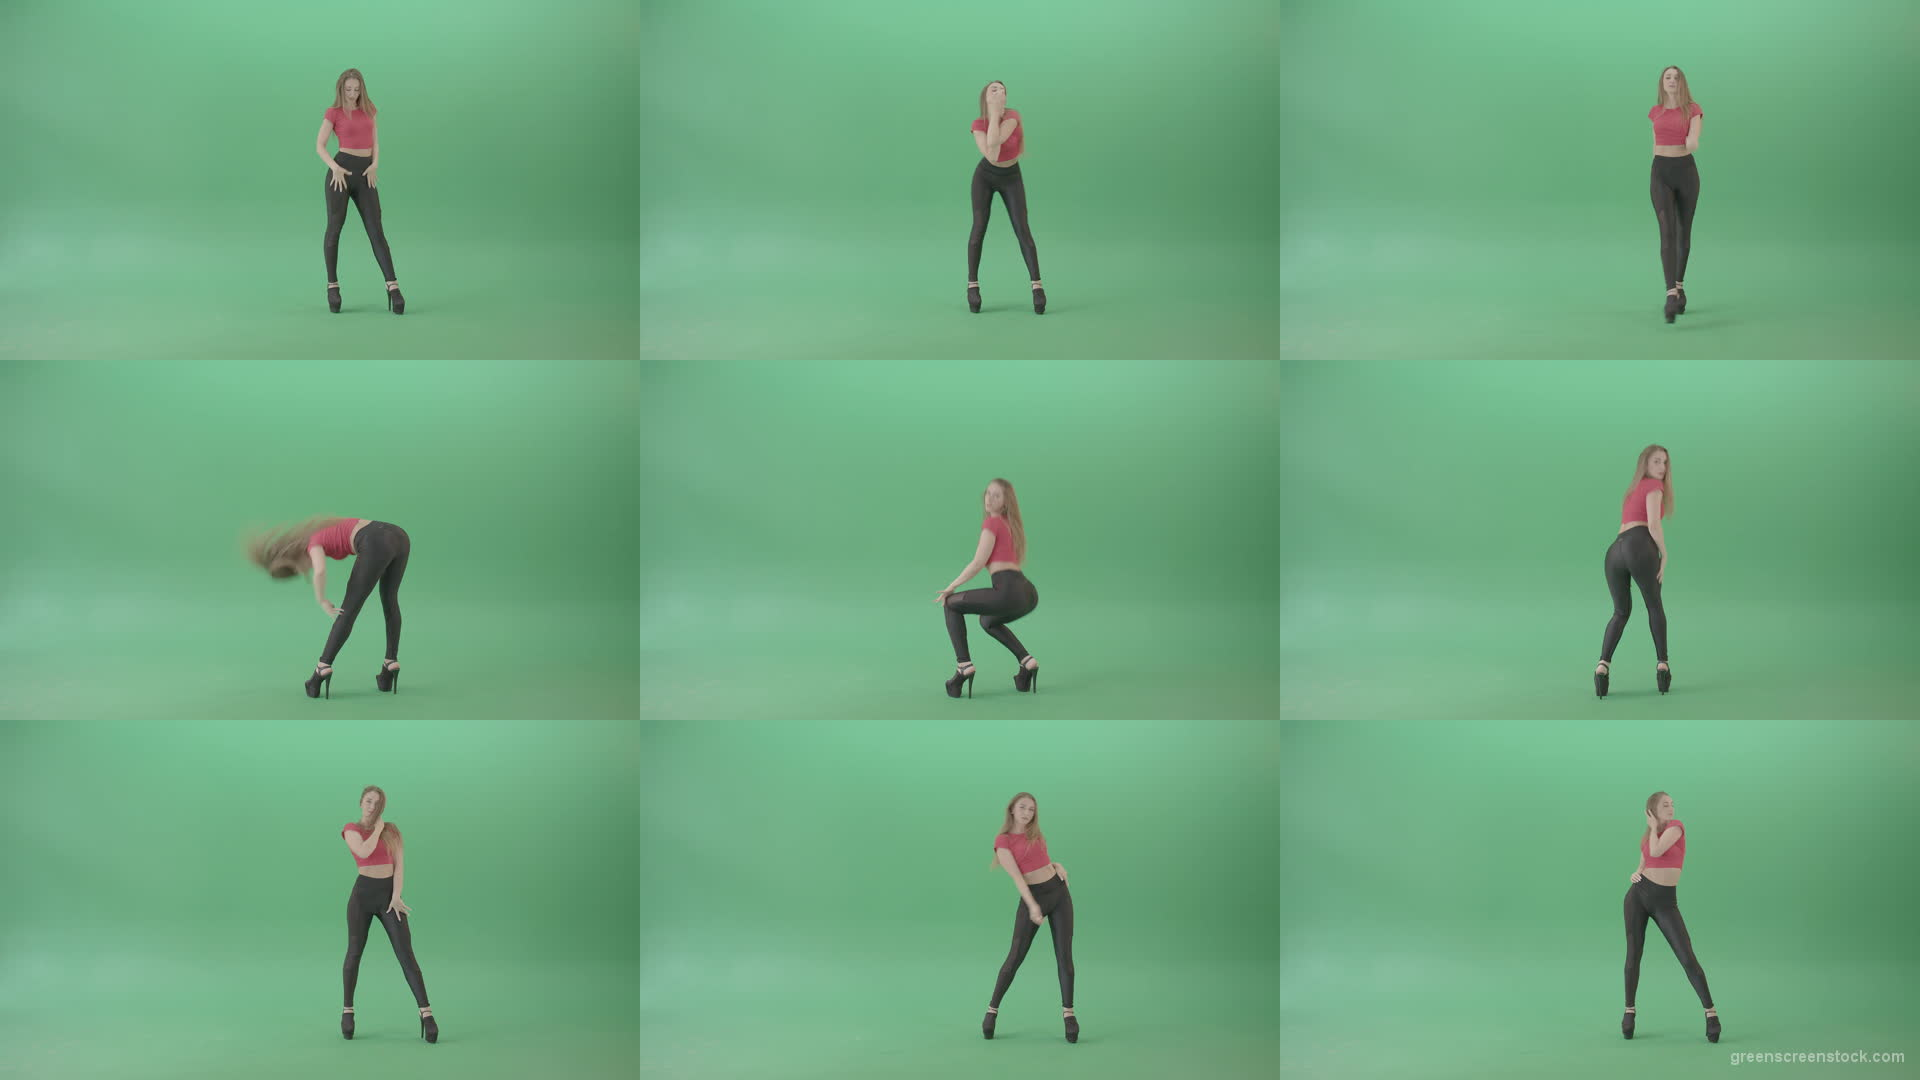 Passion-sexy-girl-on-green-screen-in-red-posing-strip-dance-4K-Video-Footage-1920 Green Screen Stock